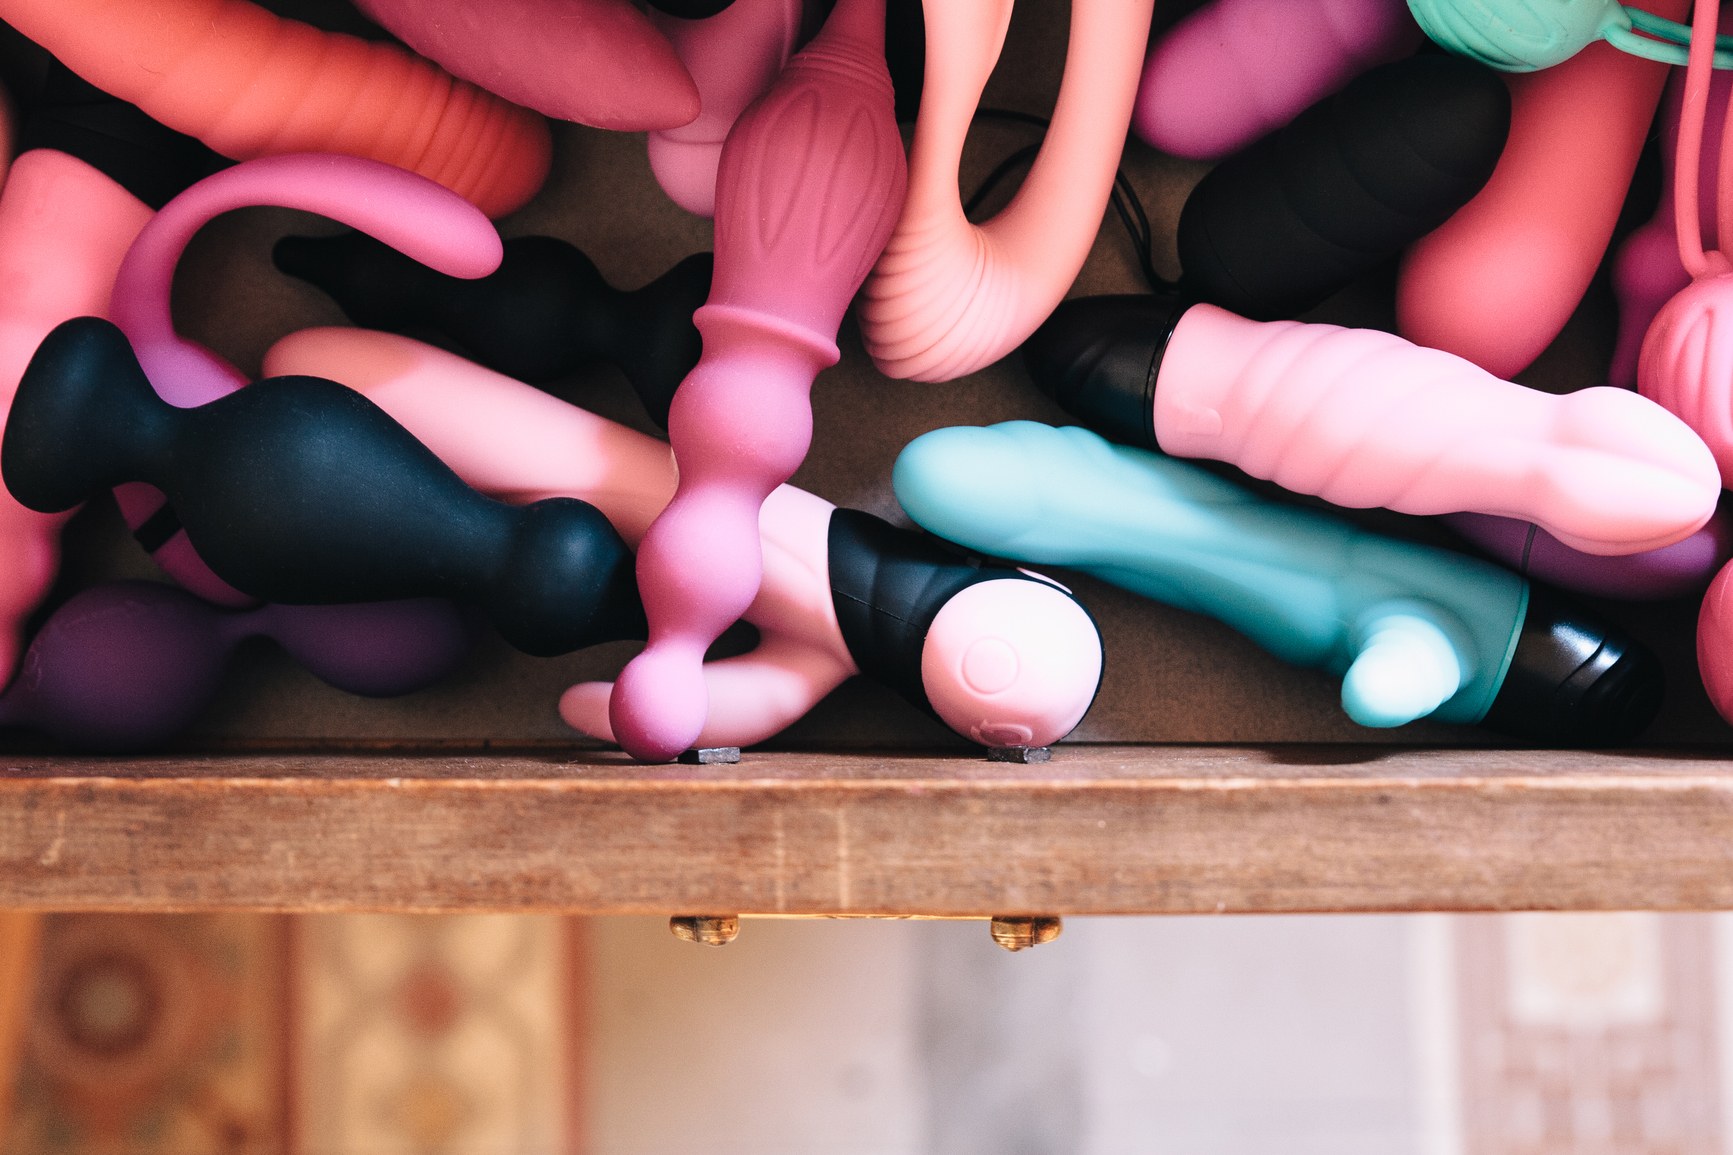 South Portland Store Says Sex Toys Will Stay, Despite City's